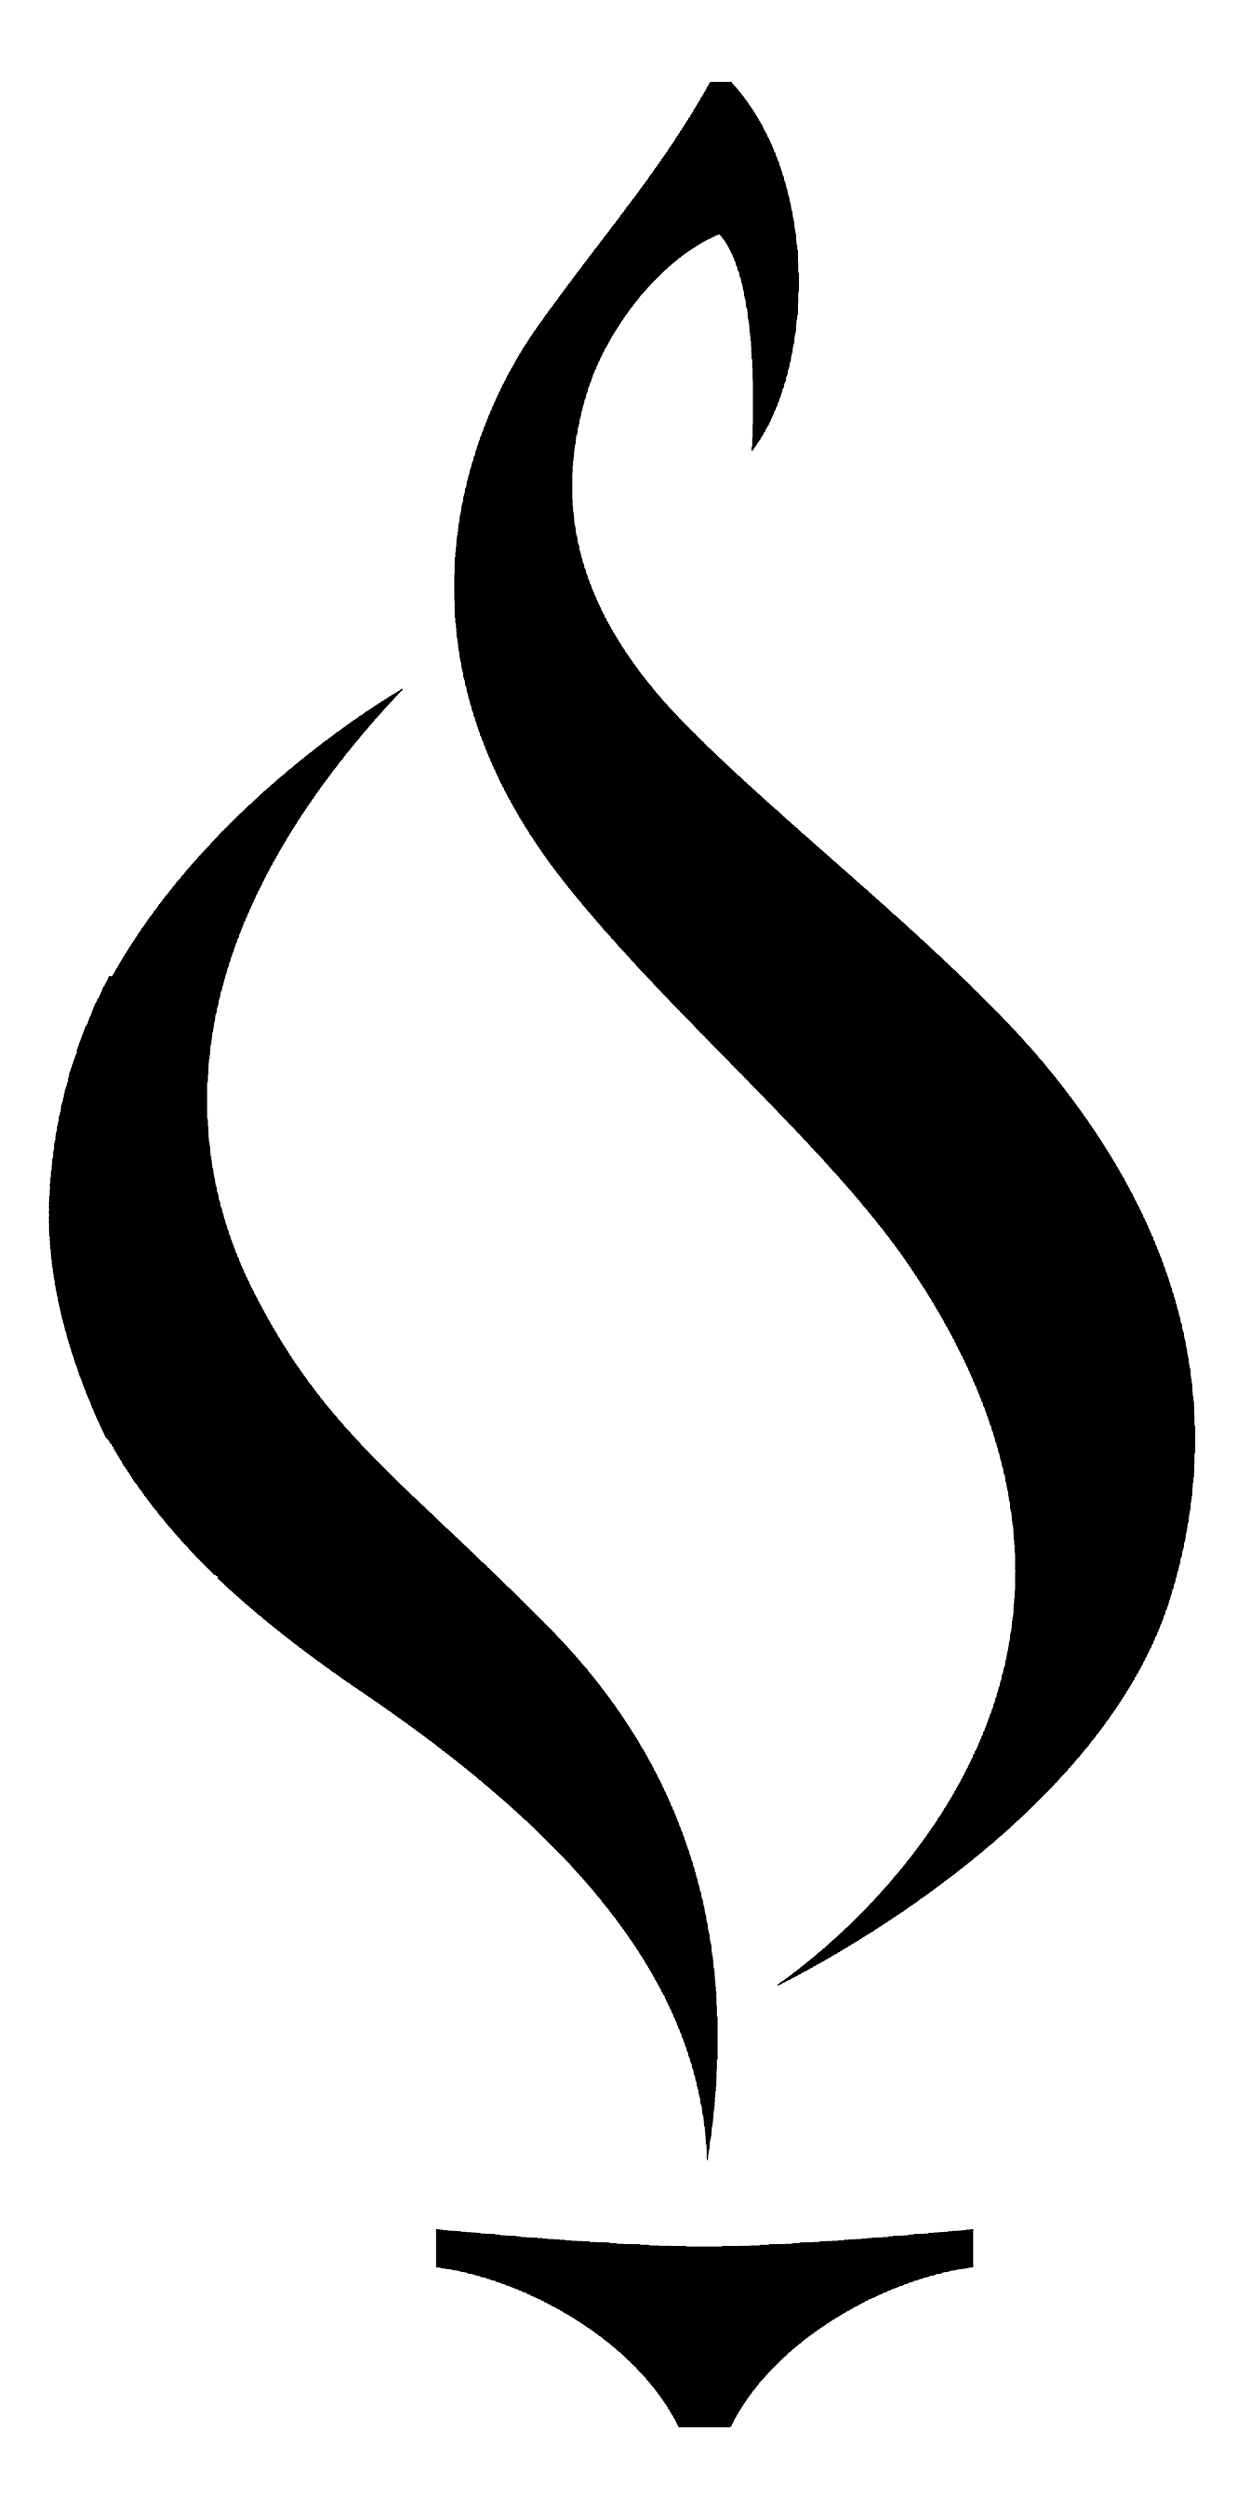 Flames clipart image #7006